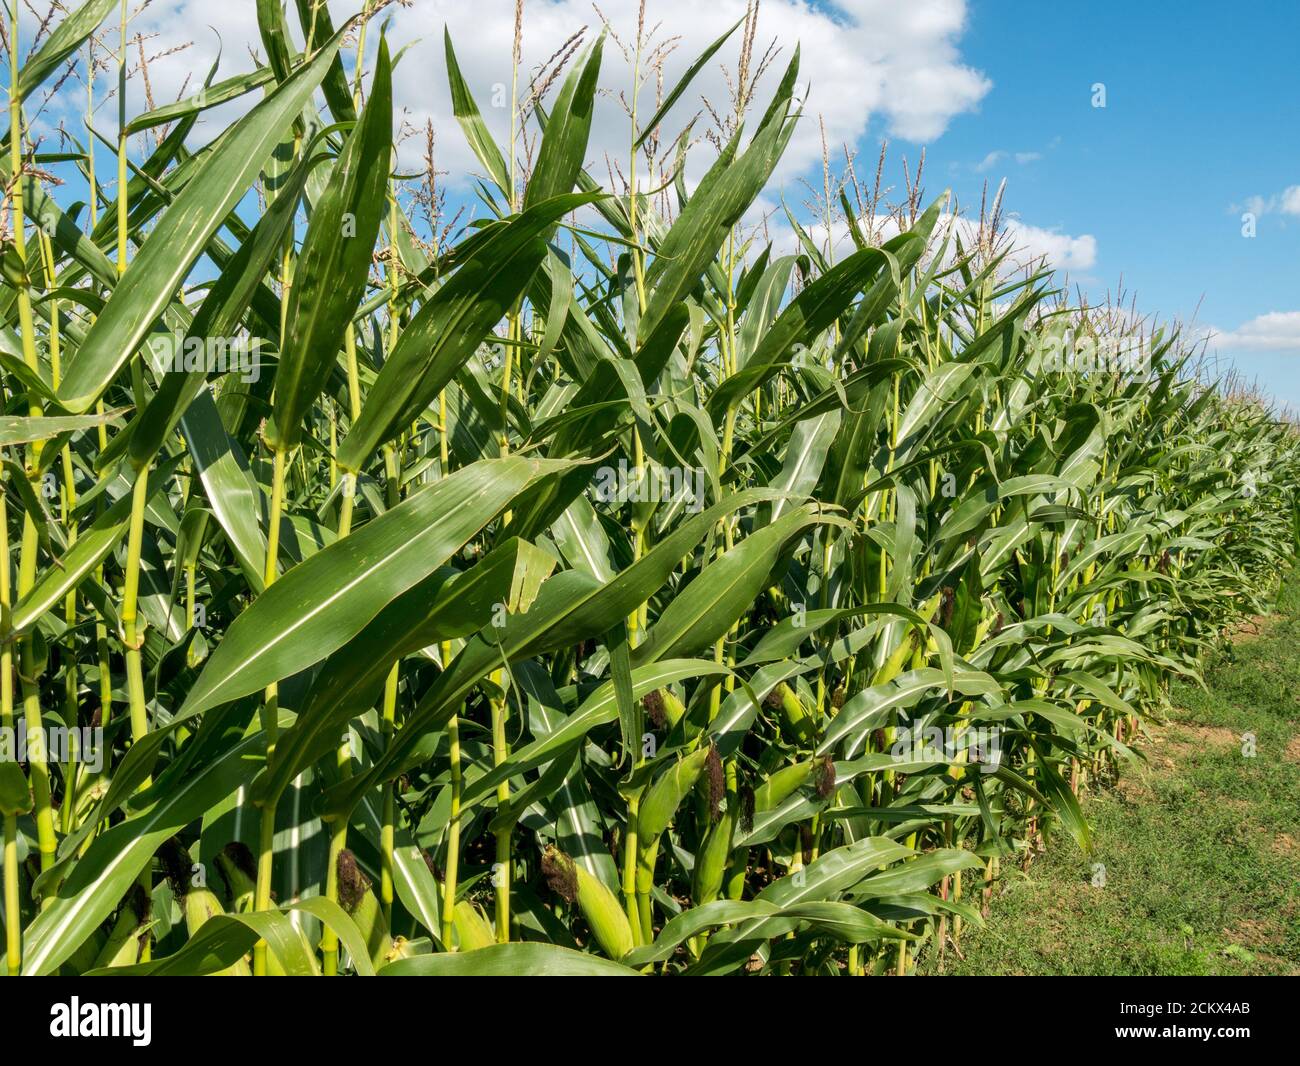 Sunlit rows of tall green maize or sweet corn crop plants growing in UK farmer's field with blue sky above in September, Leicestershire, England, UK Stock Photo